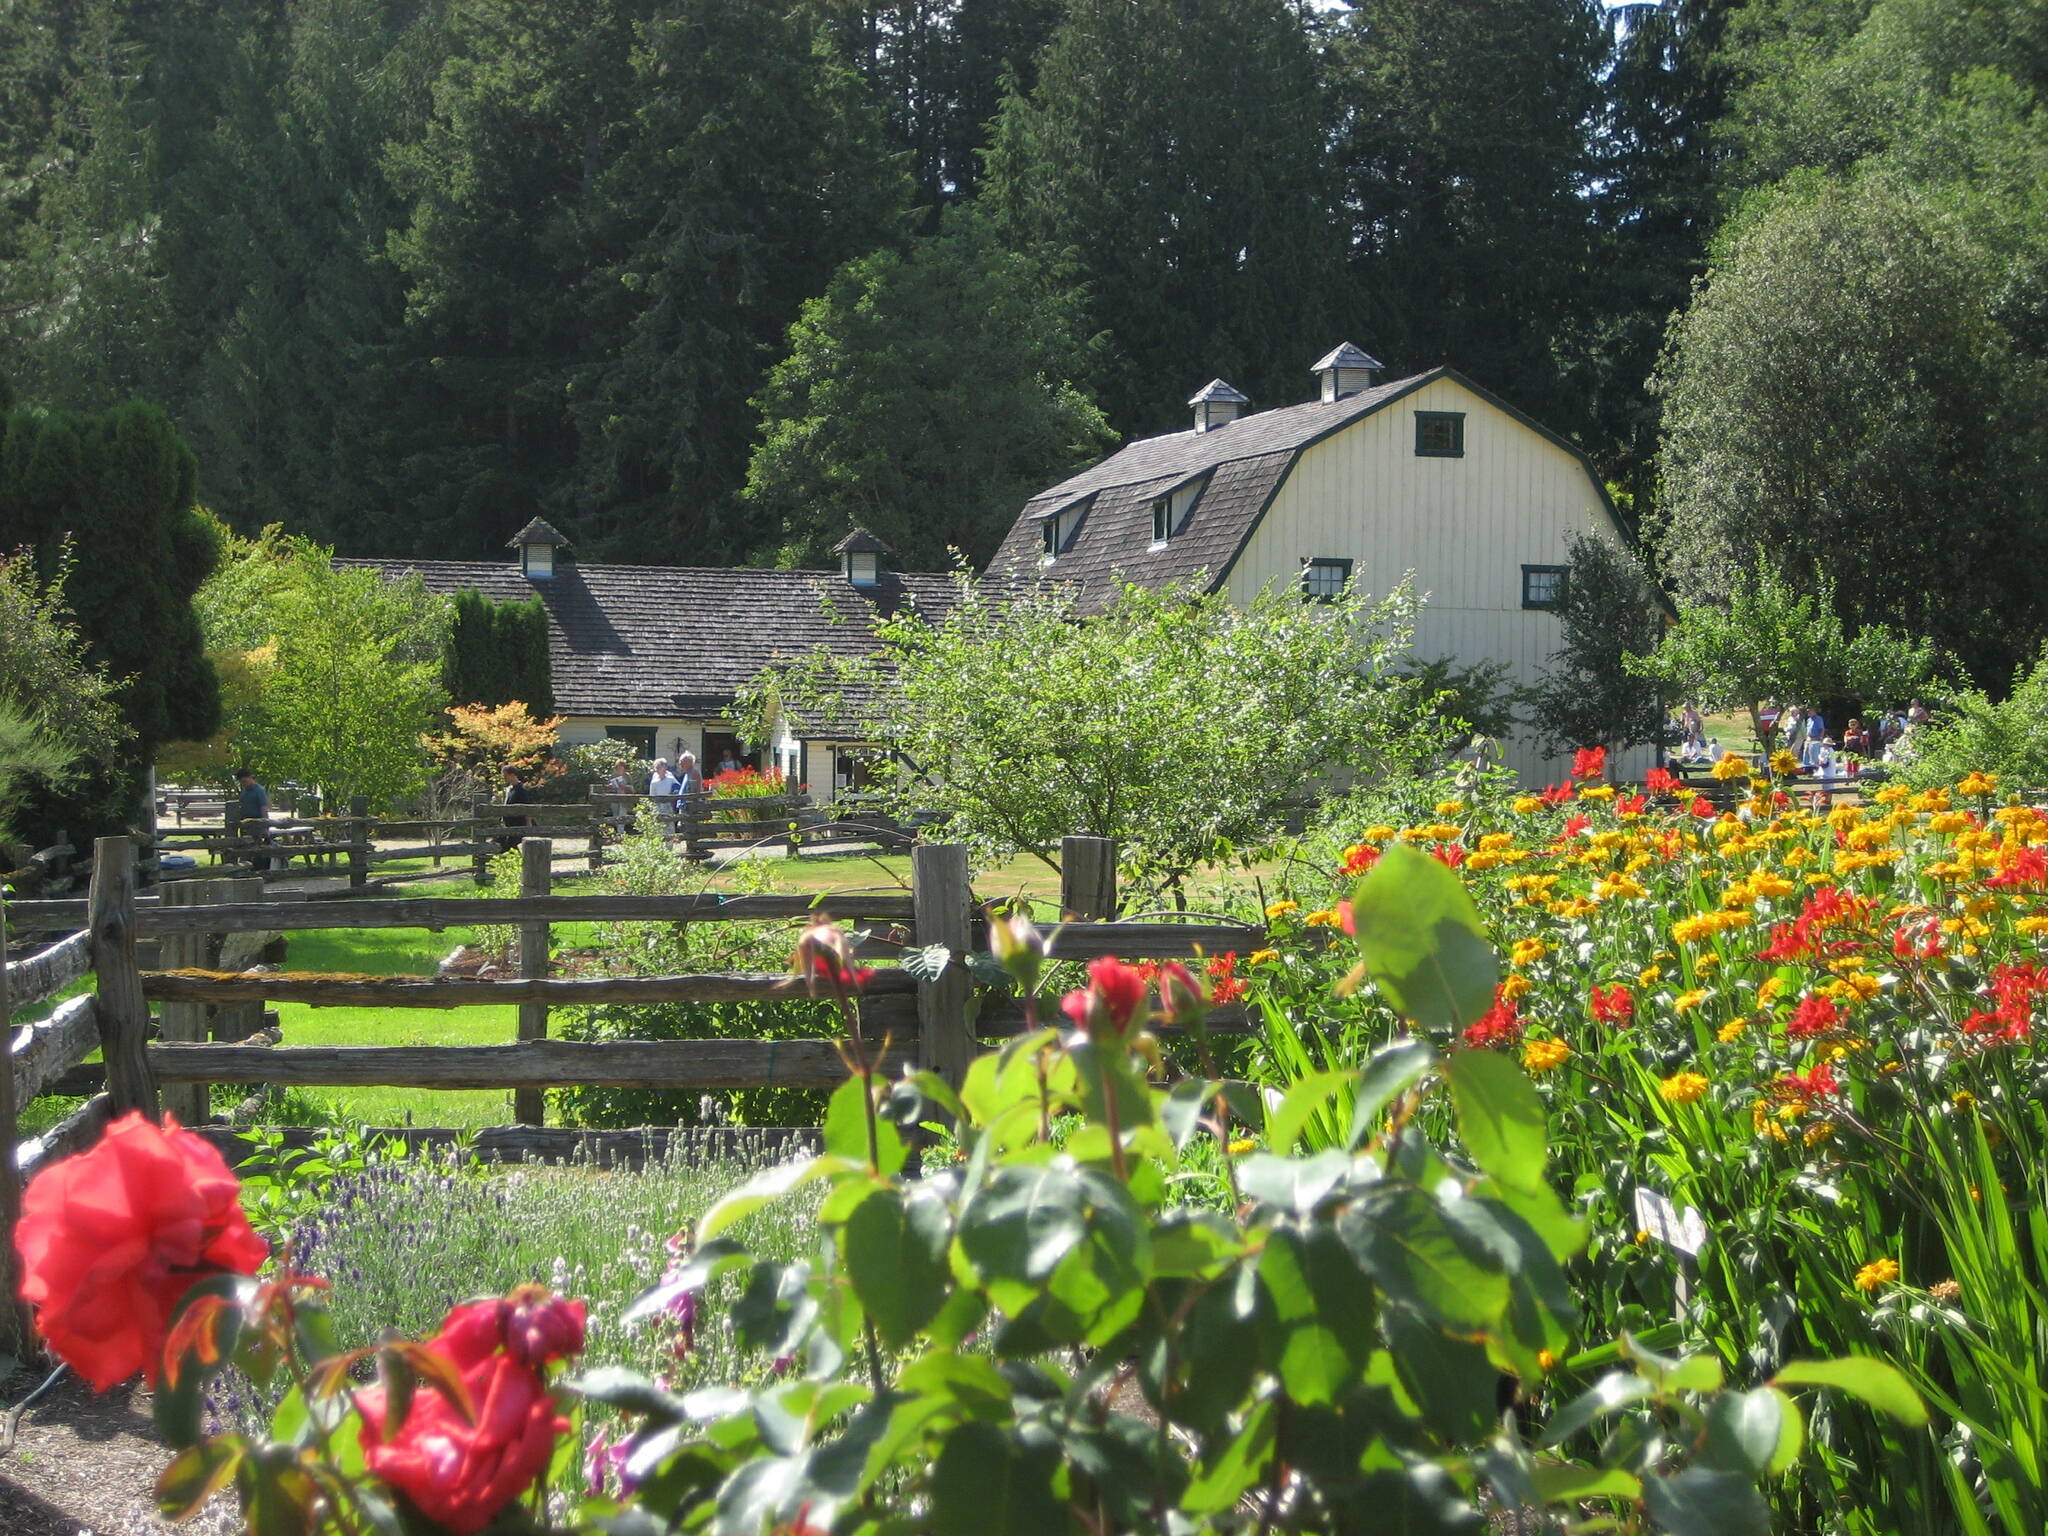 The annual Concerts in the Barn series in Quilcene runs July 9 through Sept. 4. (Concerts in the Barn)